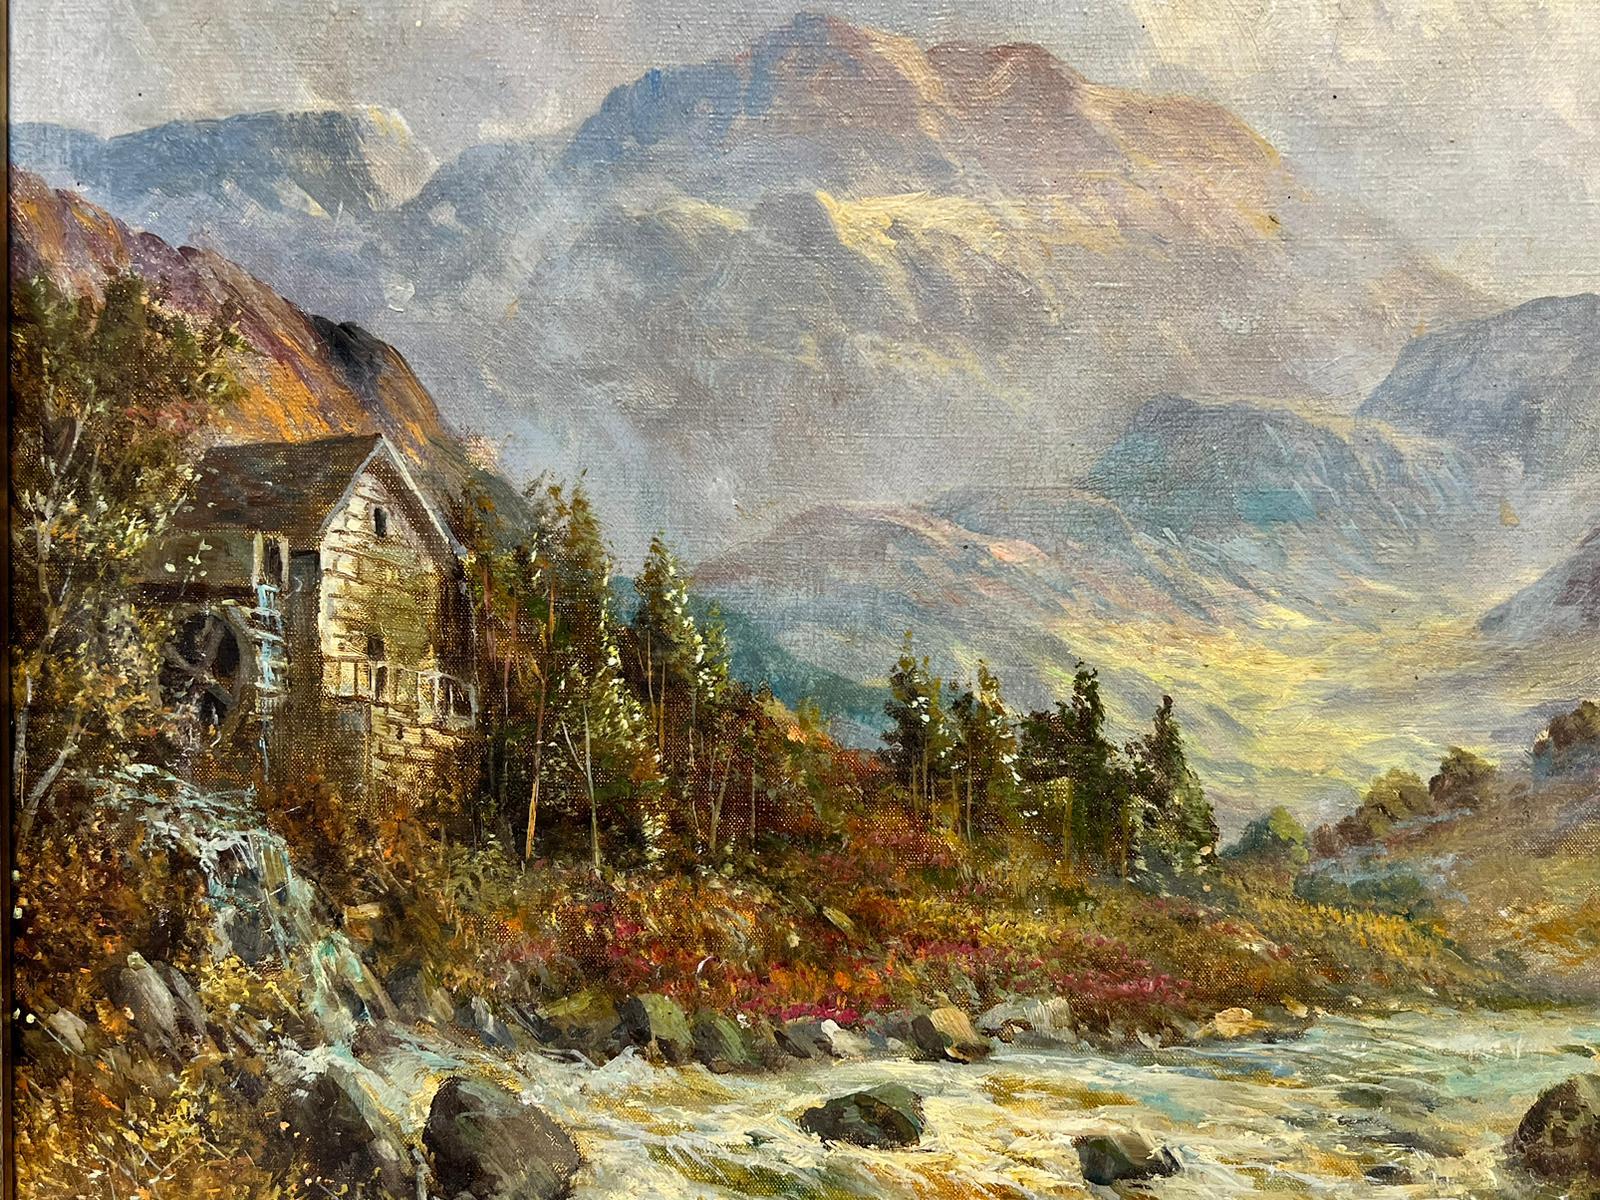 Artist/ School: by Francis E. Jamieson, British 1895-1950, signed lower corner. 

Title: The Old Watermill in the Scottish Highlands

Medium: oil on canvas, framed 

Framed: 21 x 25 inches
Canvas : 18 x 22 inches

Provenance: private collection,